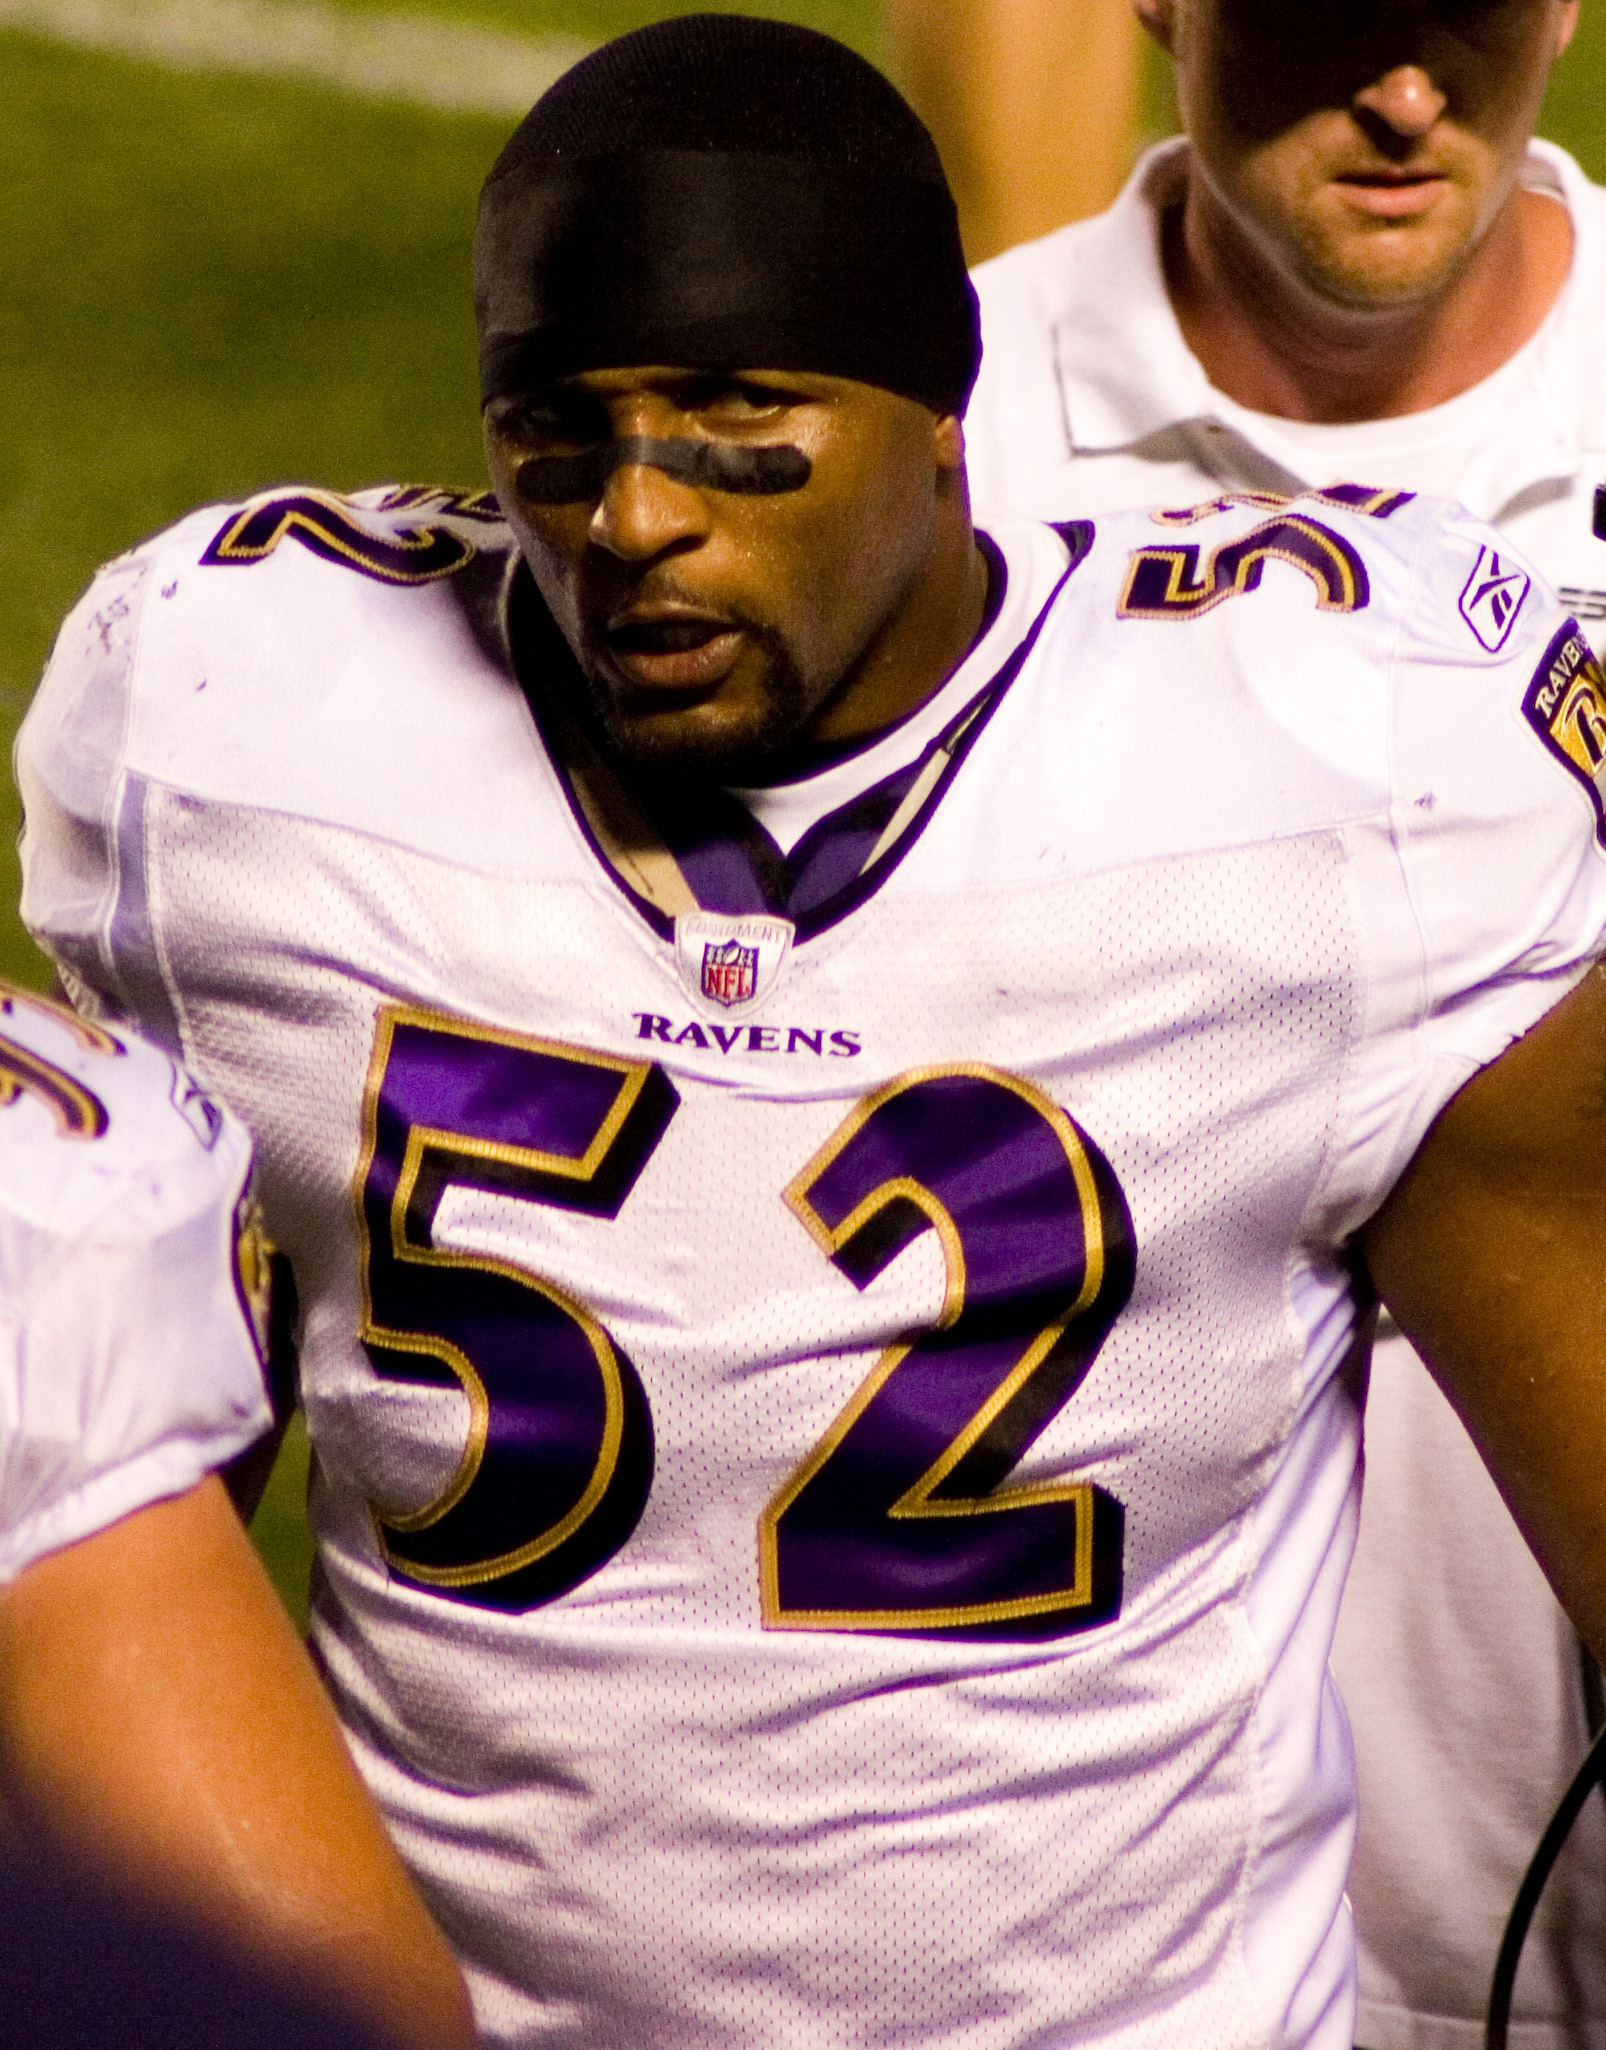 Courtesy of Wikimedia CommonsRay Lewis has been a polarizing figure for most of his career. Superbowl XLVII will be his last game before retirement.